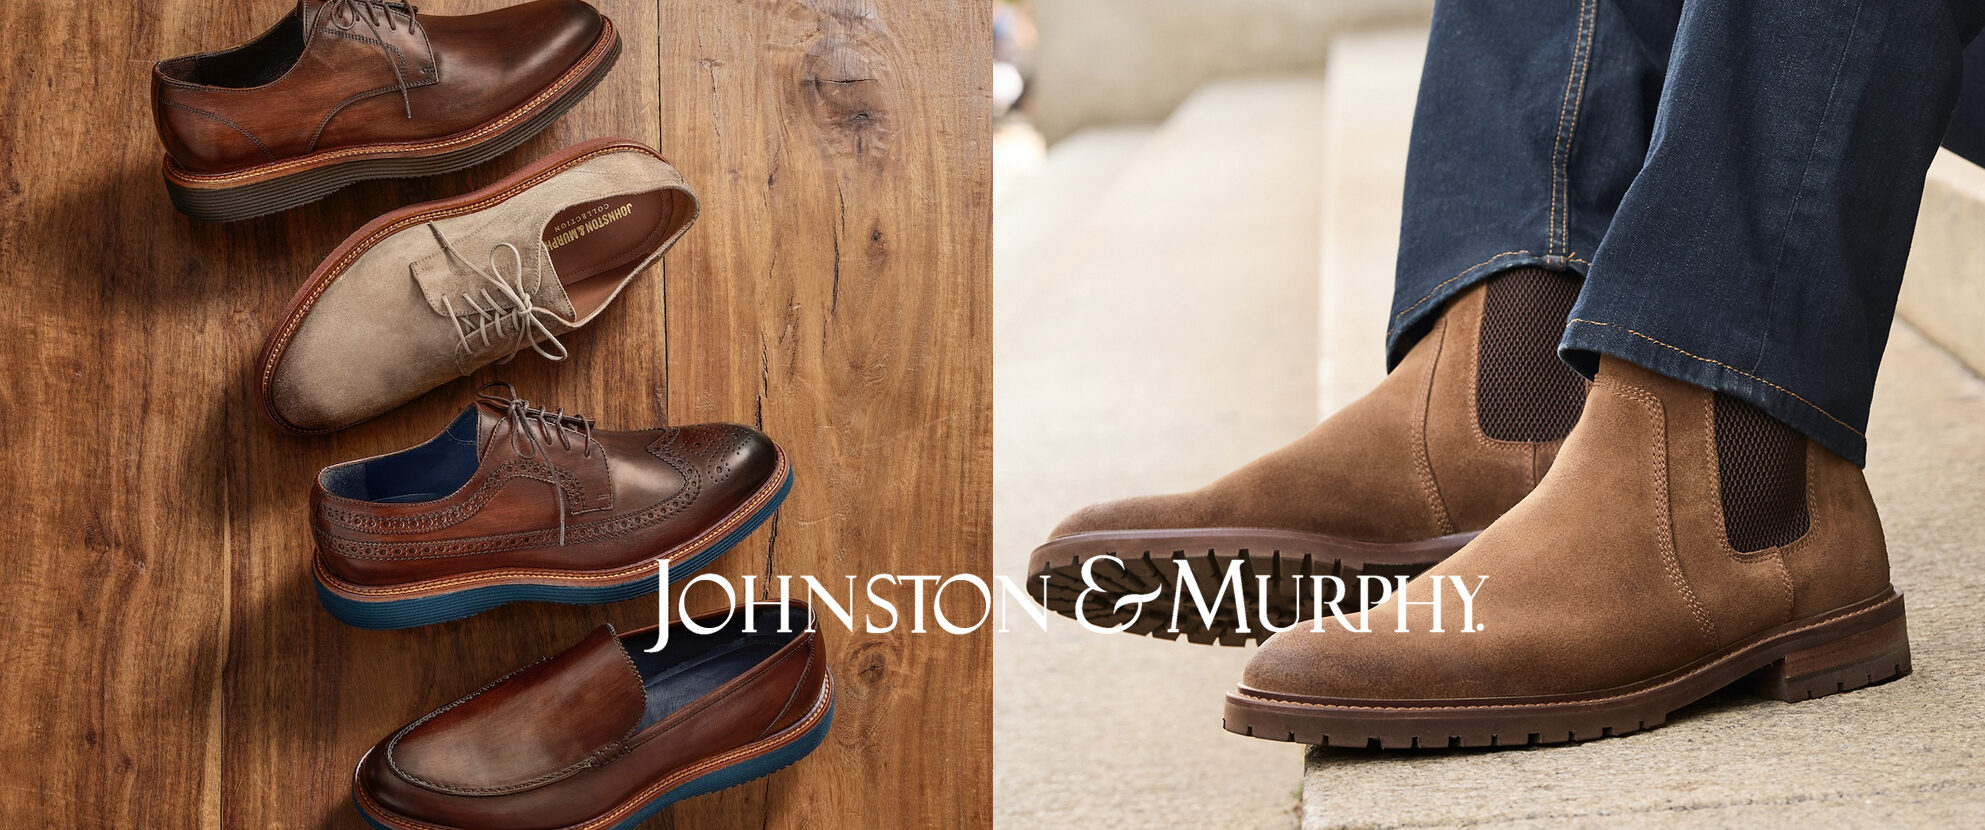 Dean's Clothing Featured Brand - Johnston & Murphy shoes.